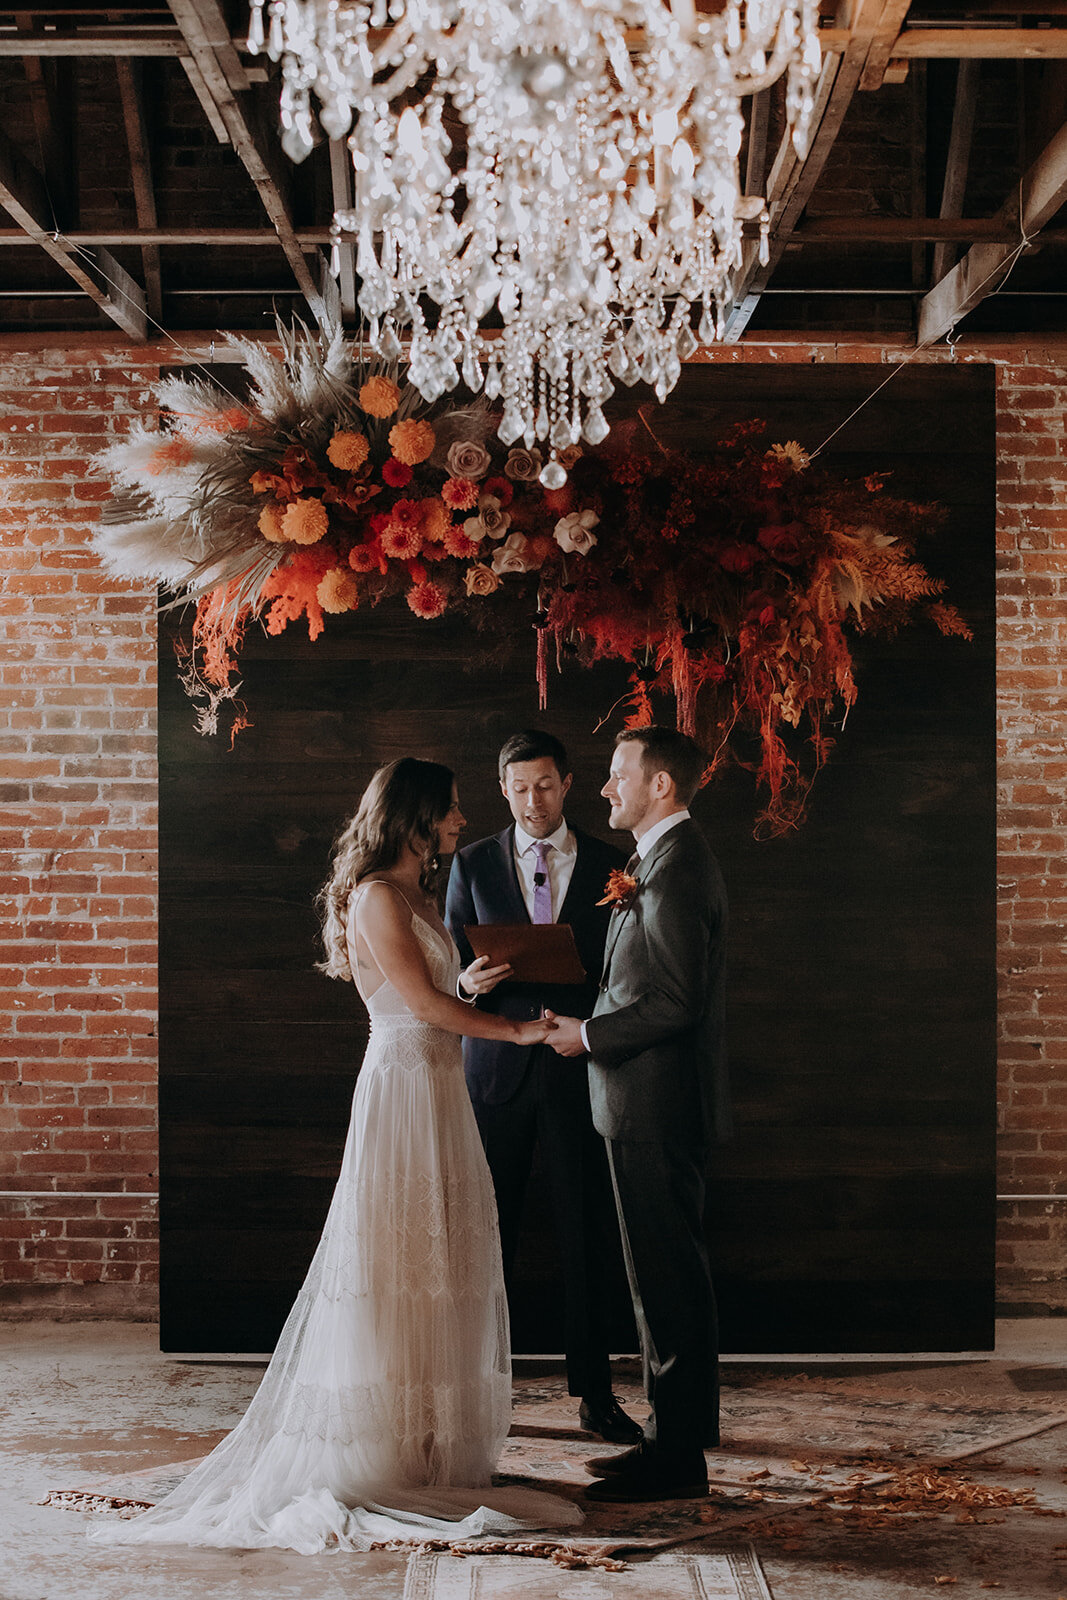 Romantic industrial wedding ceremony held at the St Vrain, boulder county wedding evnue